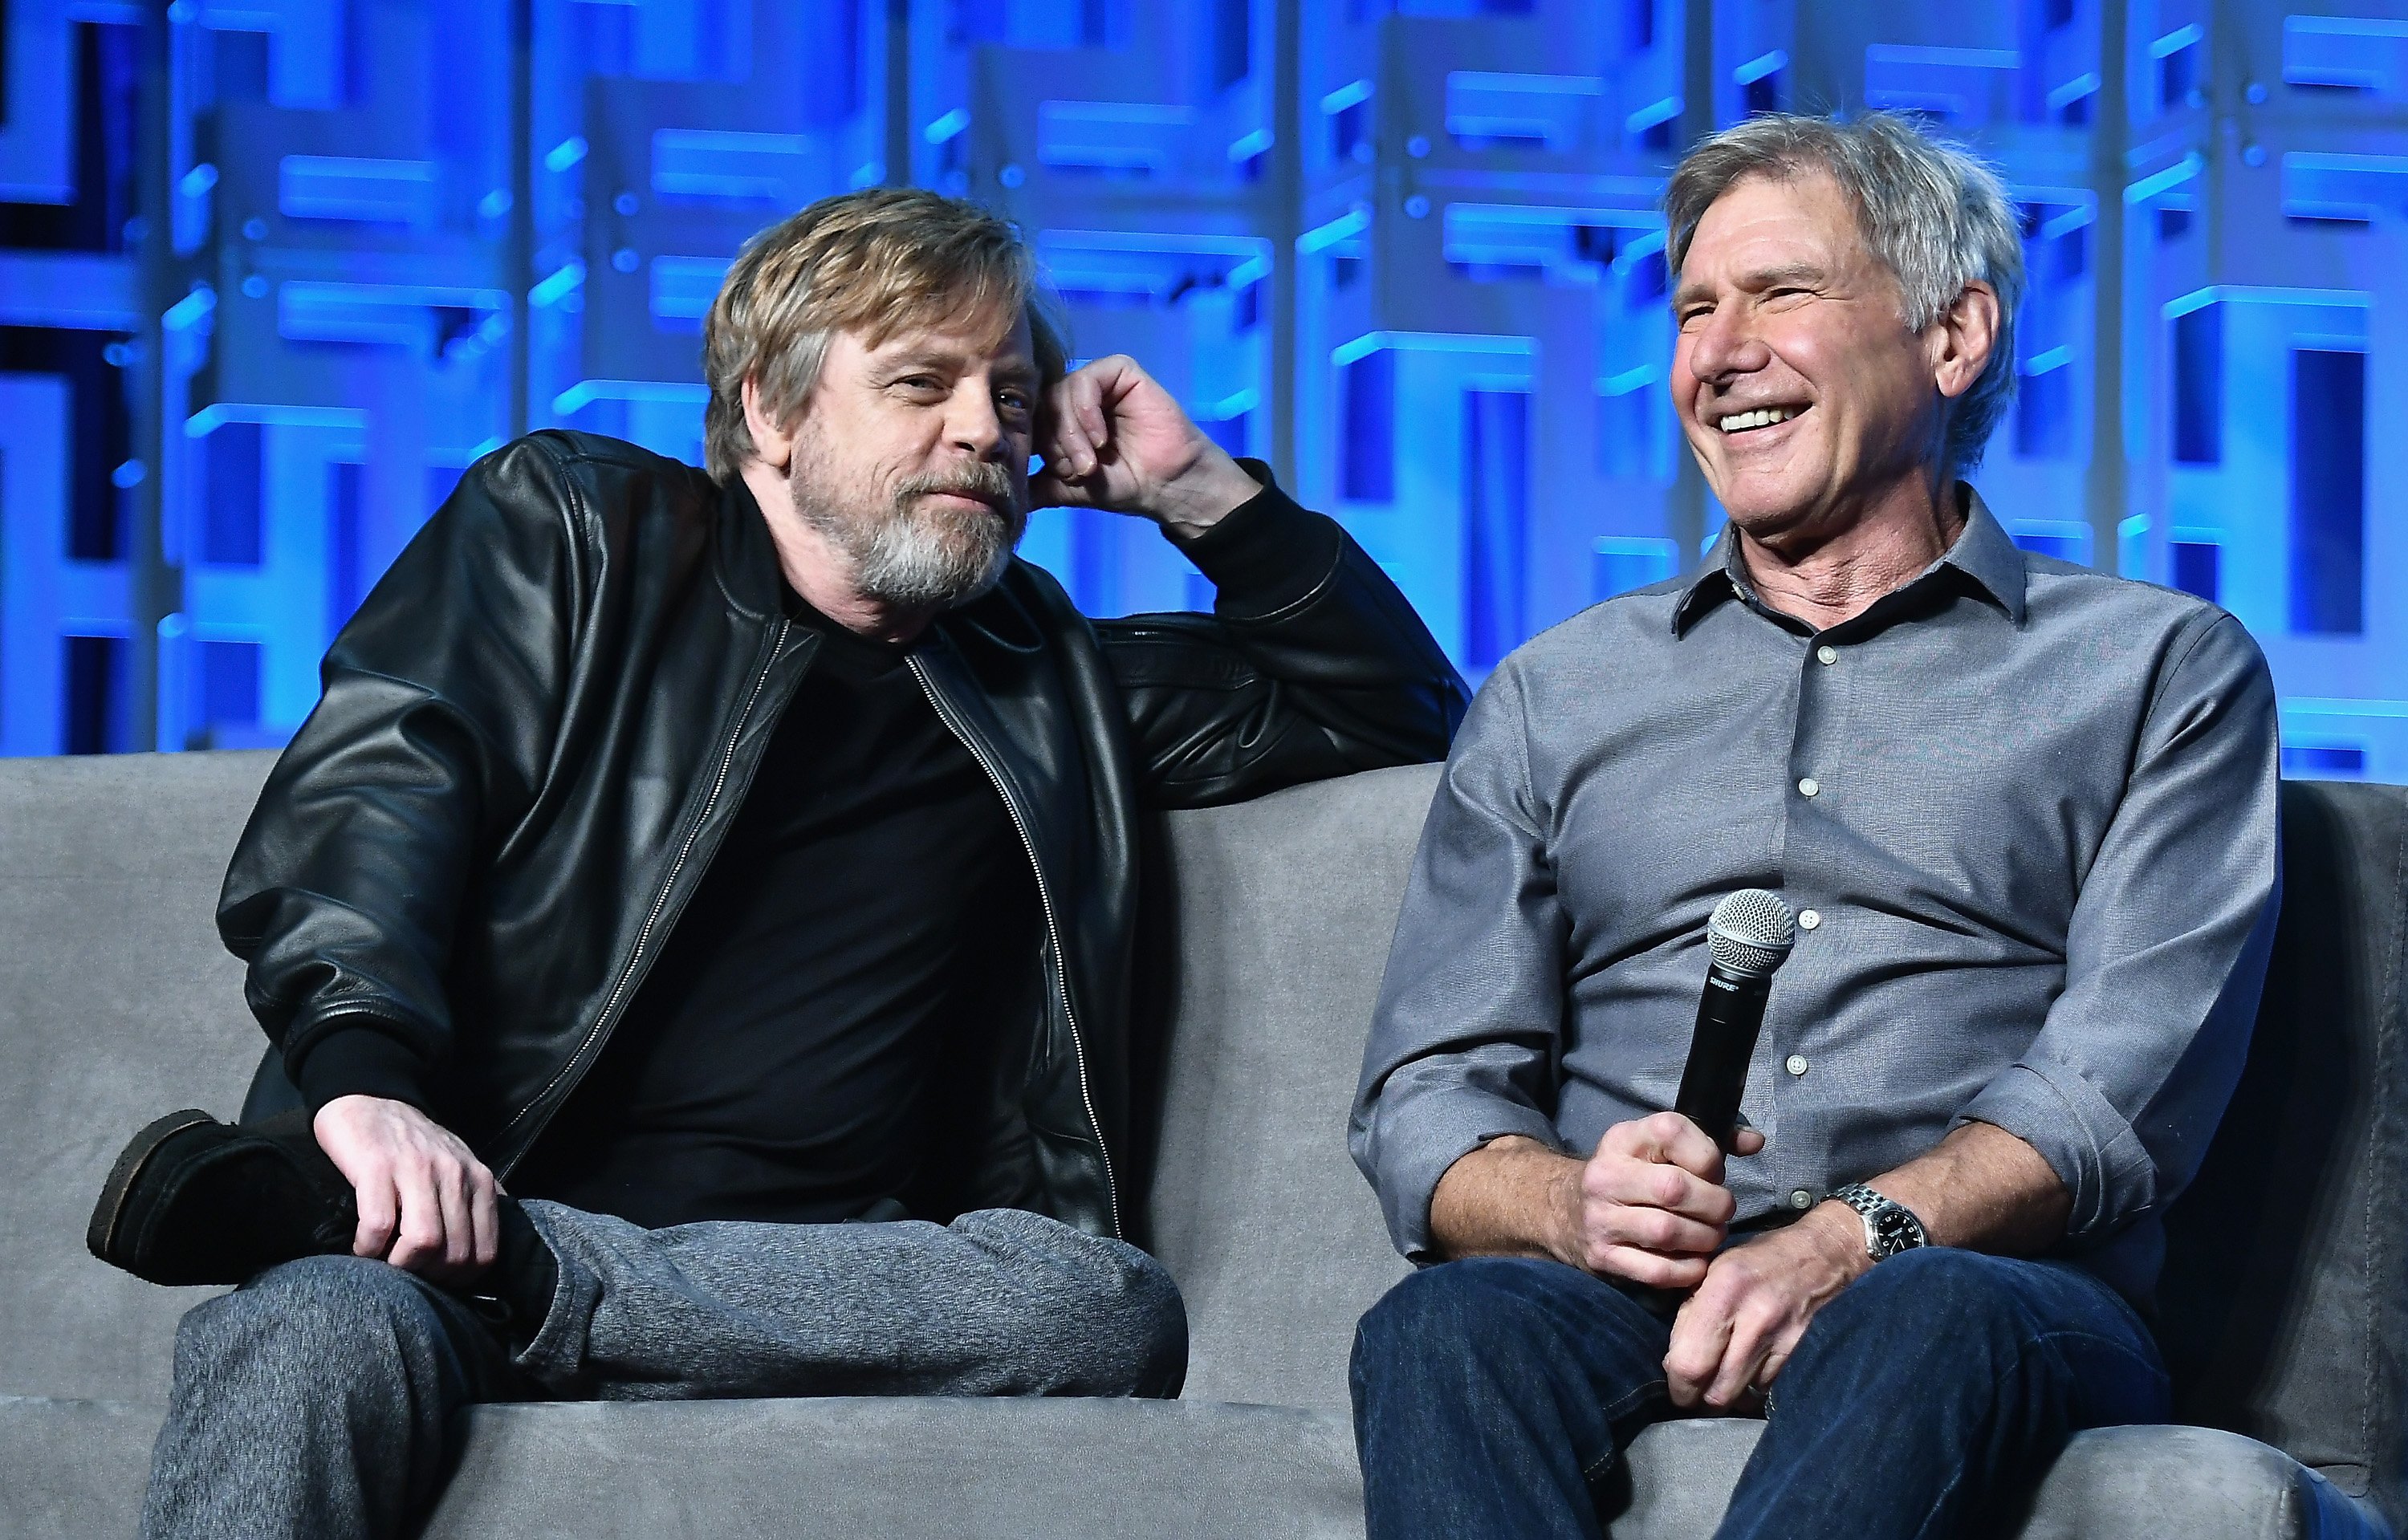 Which Star Wars Actor Has The Highest Net Worth?